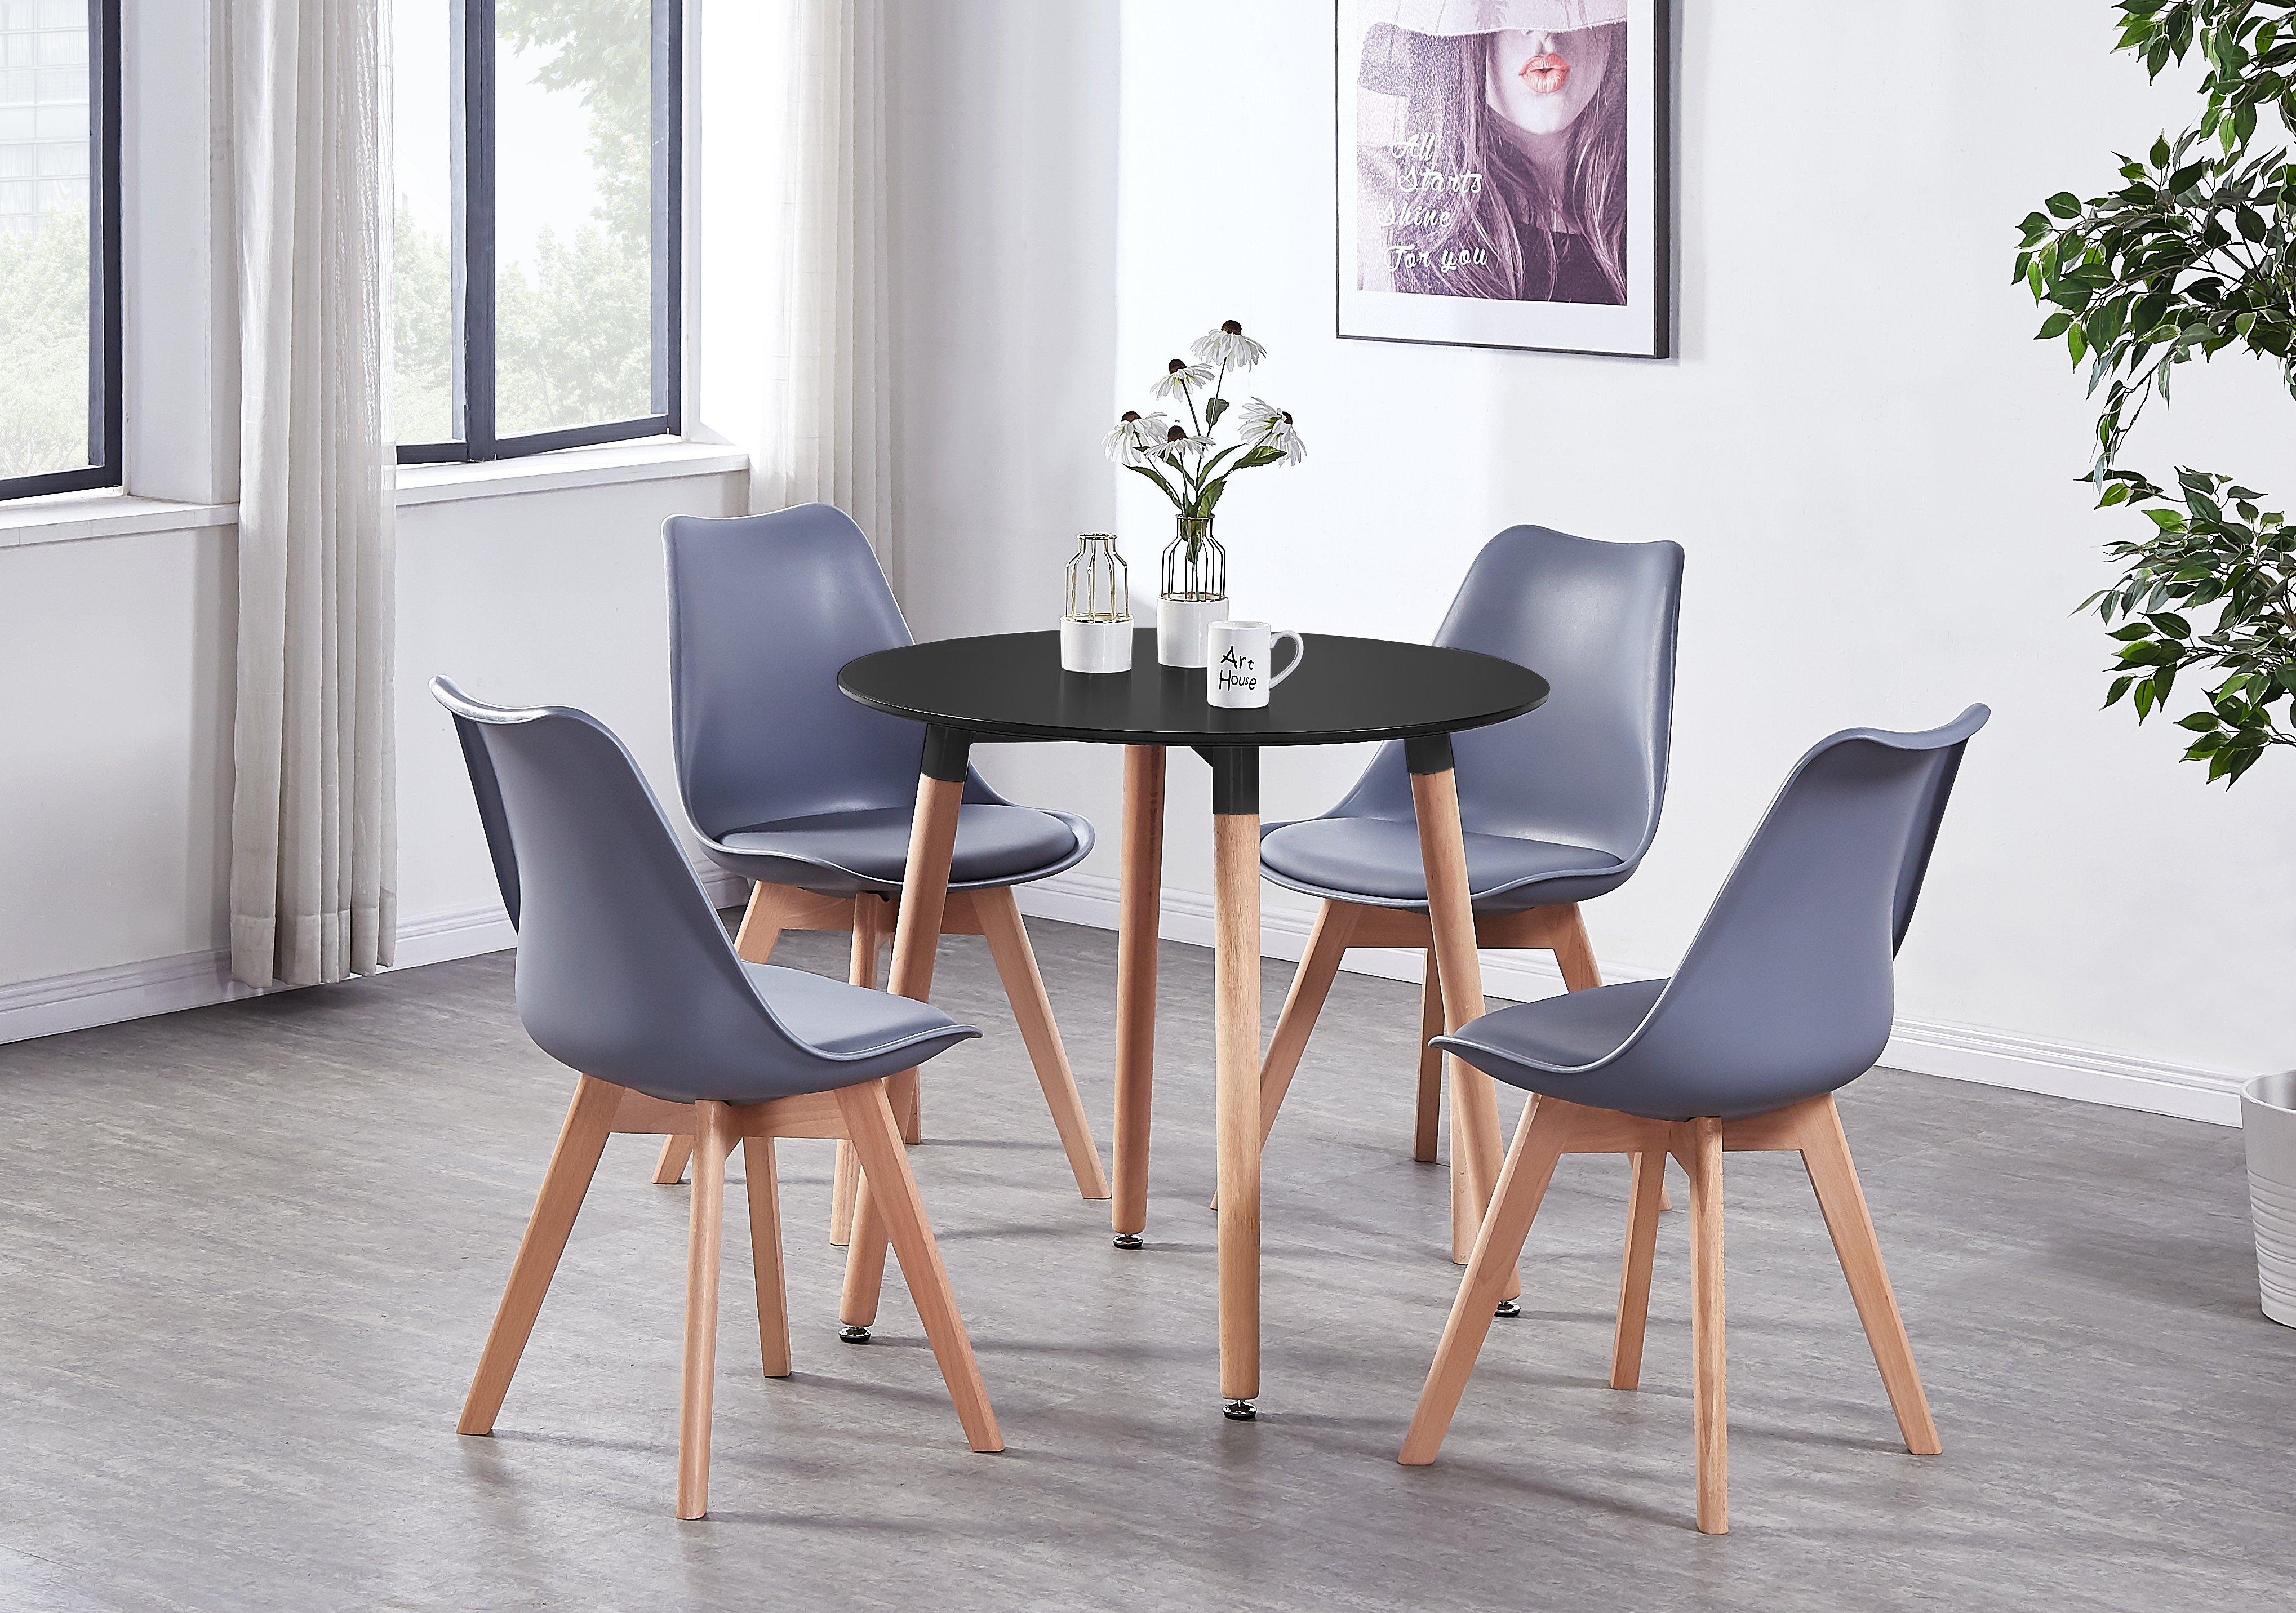 'Lorenzo' Round Dining Set with a Table and Dining Chair Set of 4